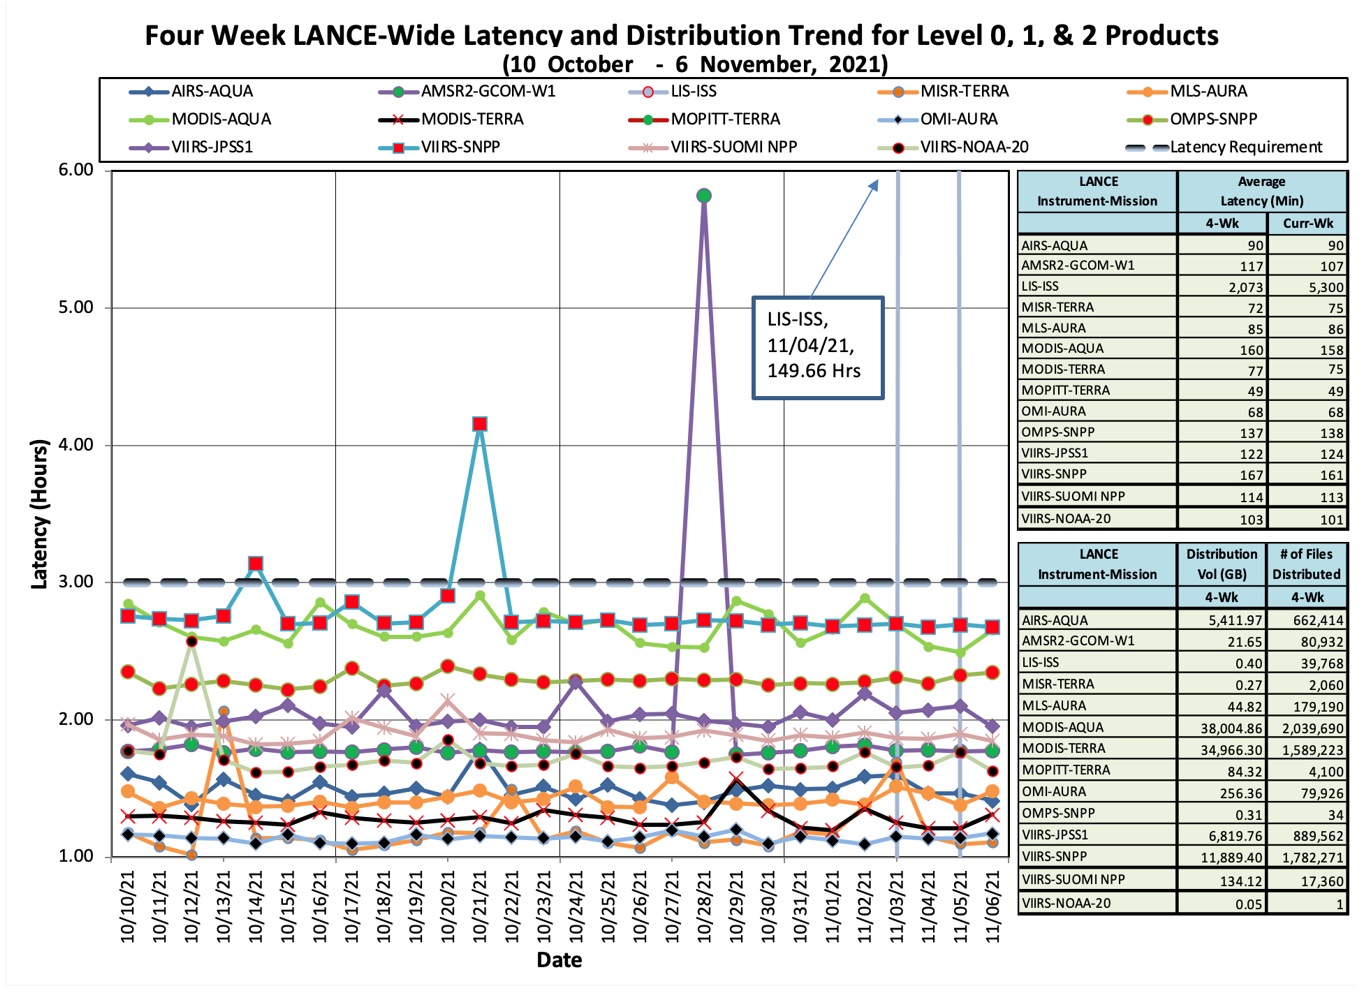 Cumulative four weeks latency for LANCE Levels 0, 1, 2 products